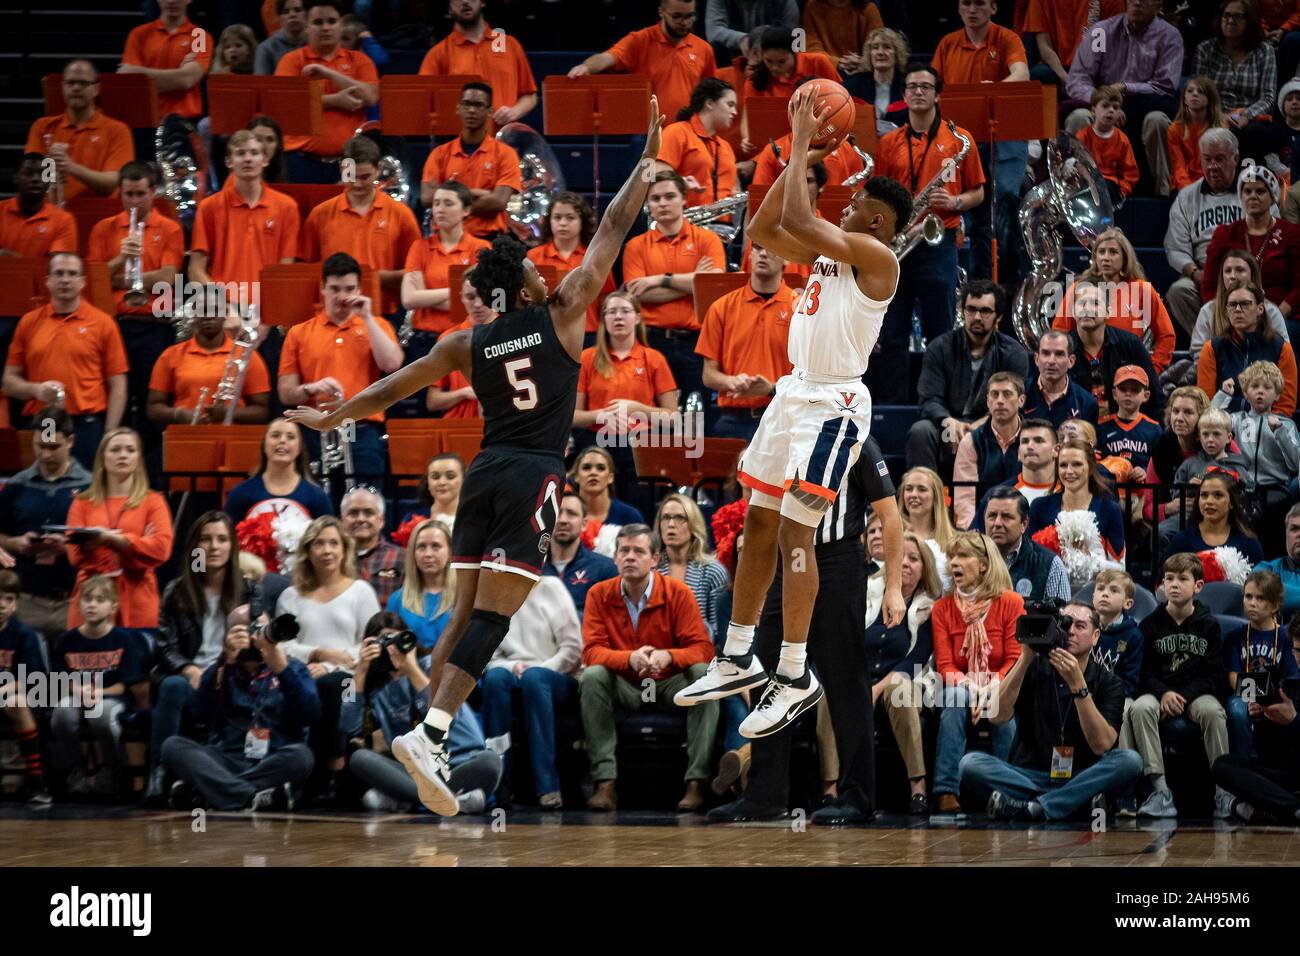 Charlottesville, VA, USA. 22nd Dec, 2019. Virginia Guard Casey Morsell (13) shoots over South Carolina Guard Jermaine Couisnard (5) during the NCAA Basketball game between the University of South Carolina Gamecocks and University of Virginia Cavaliers at John Paul Jones Arena in Charlottesville, VA. Brian McWaltersCSM/Alamy Live News Stock Photo